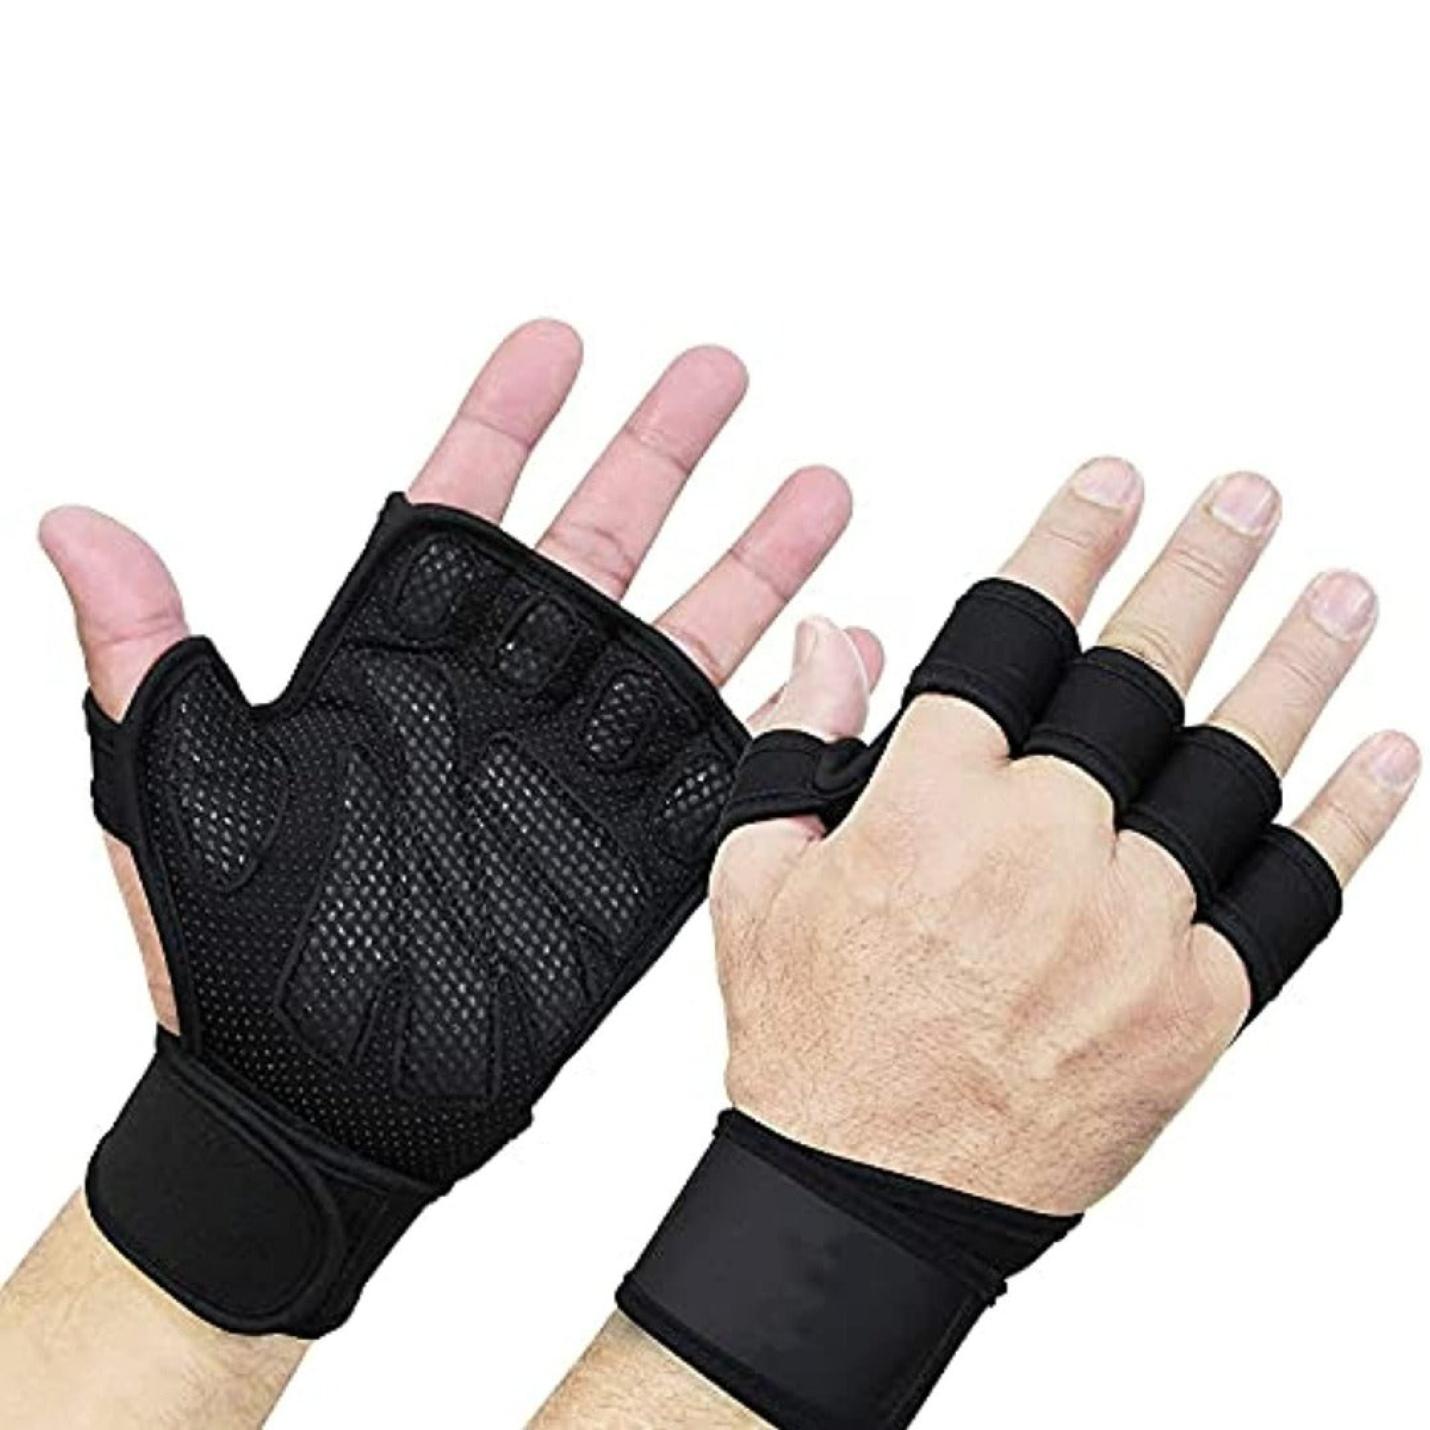 Gym workout gloves with padded leather and wrist wrap